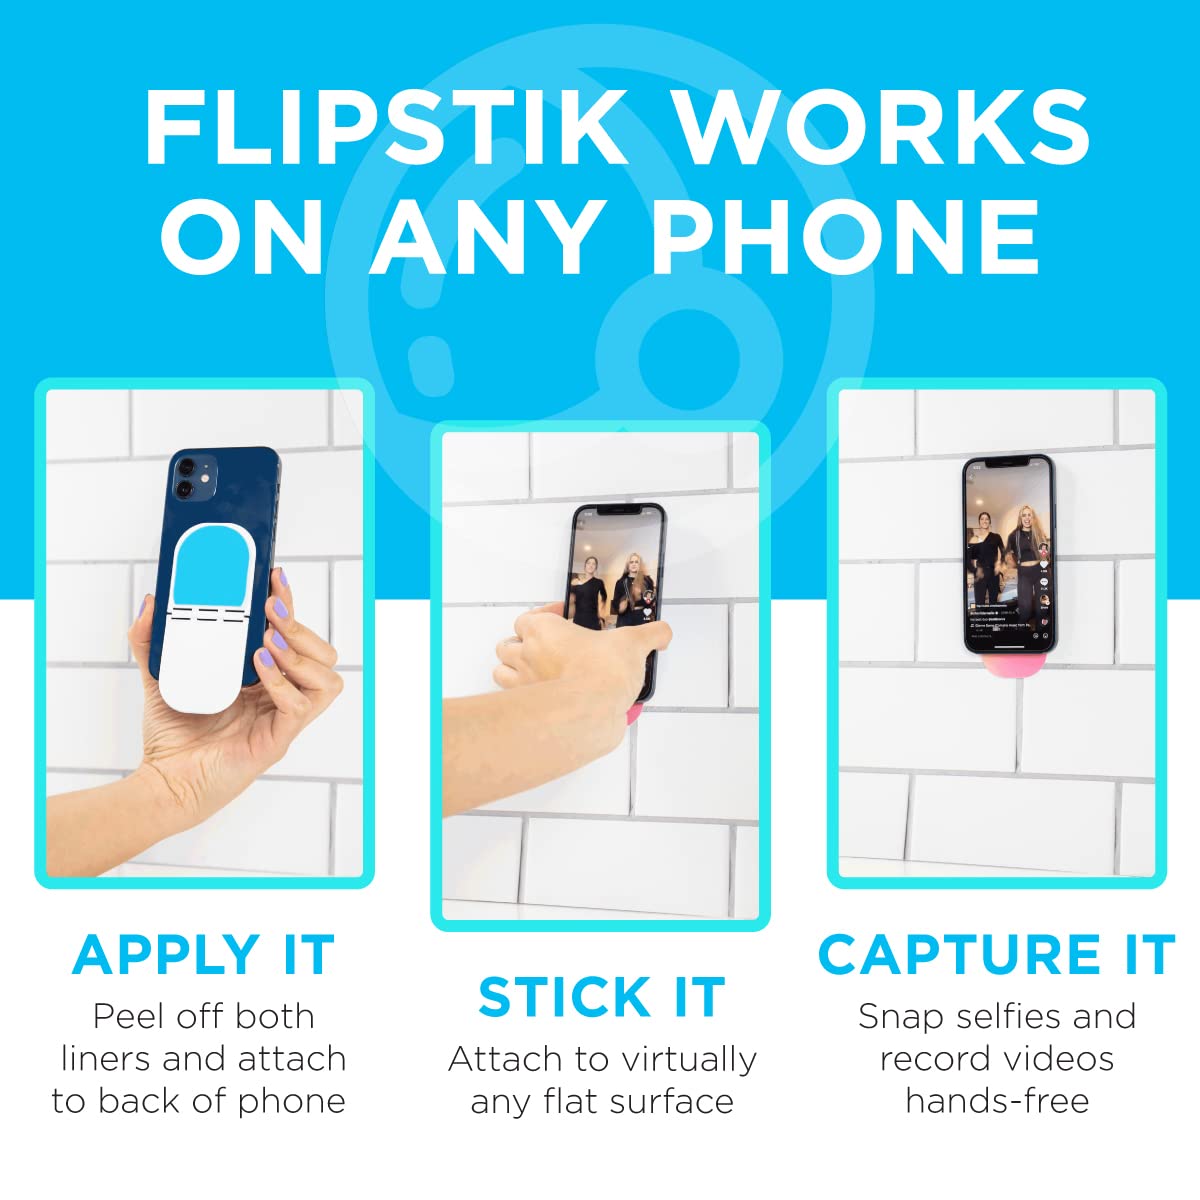 Flipstik 3.0 Foldable Adhesive Phone Mount – Sticks to Any Flat Surface – Hands Free Selfies, Videos, Car Mount, Phone Stand, Travel Accessory – Sticky Phone Mount (Void [Black])